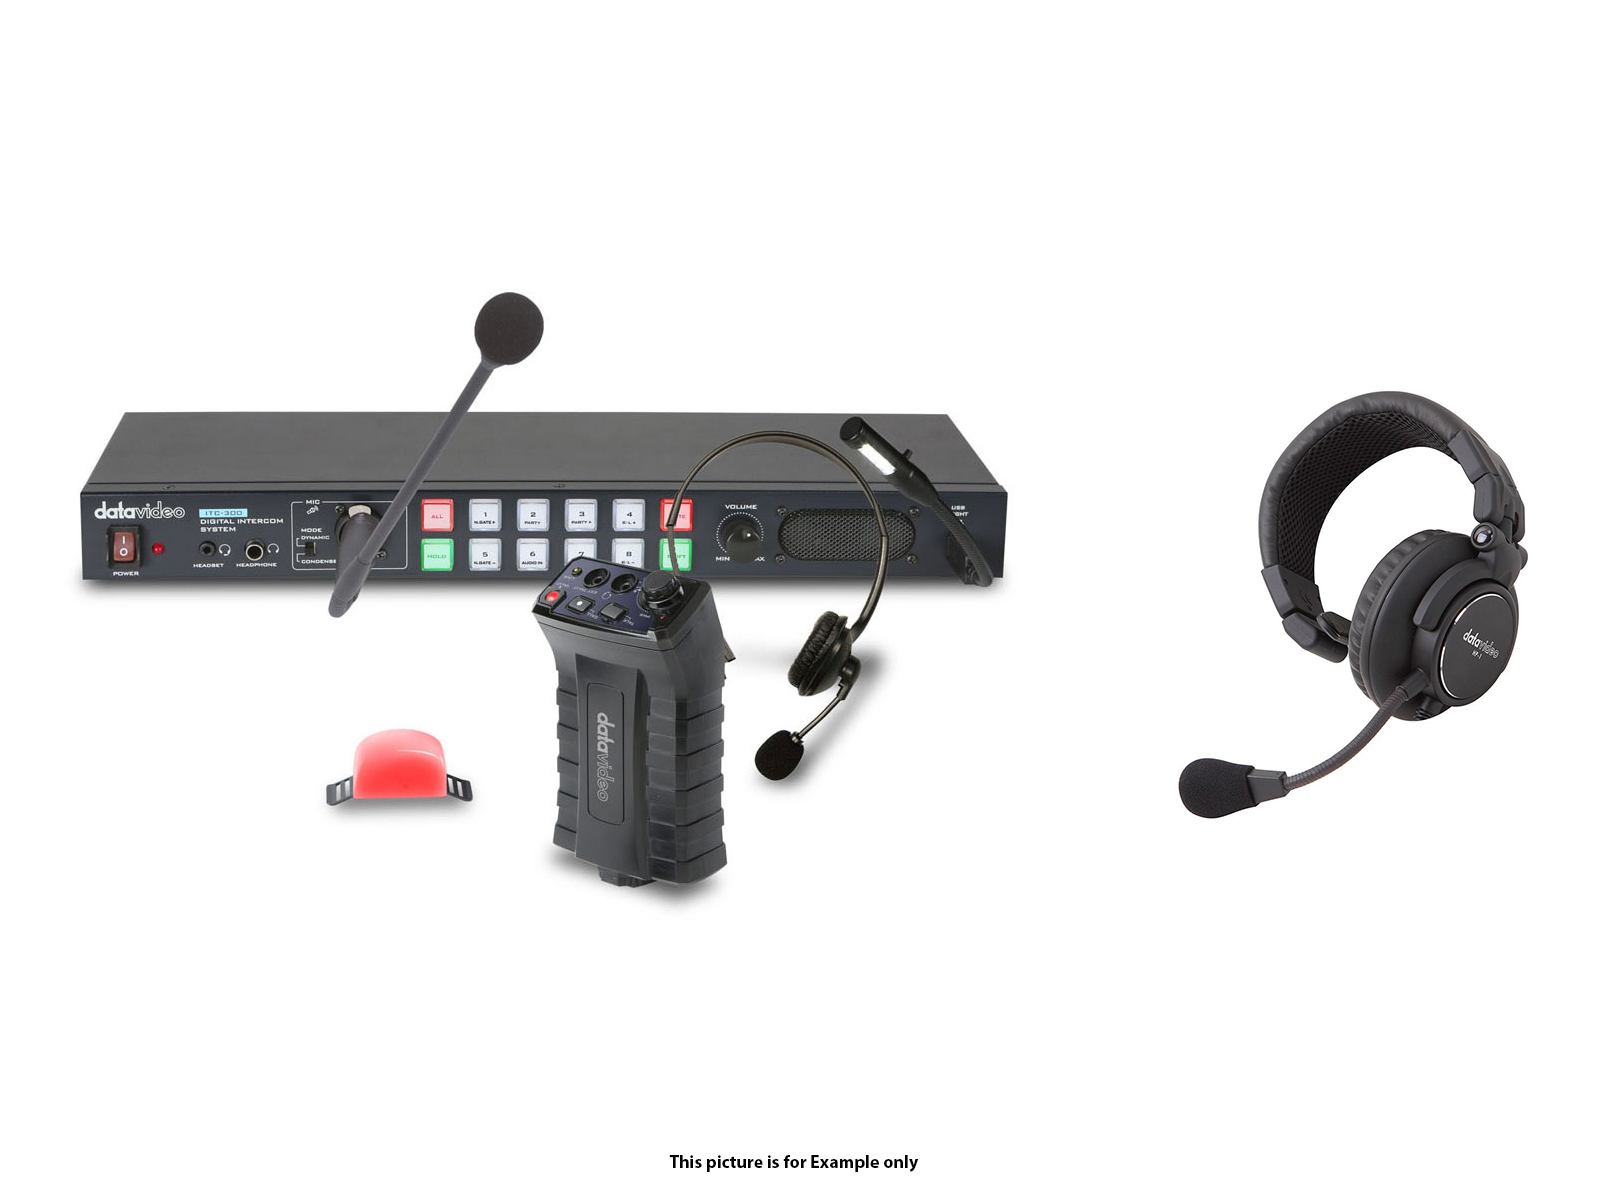 ITC300HP1K Digital intercom system with 4x HP1 headsets by Datavideo